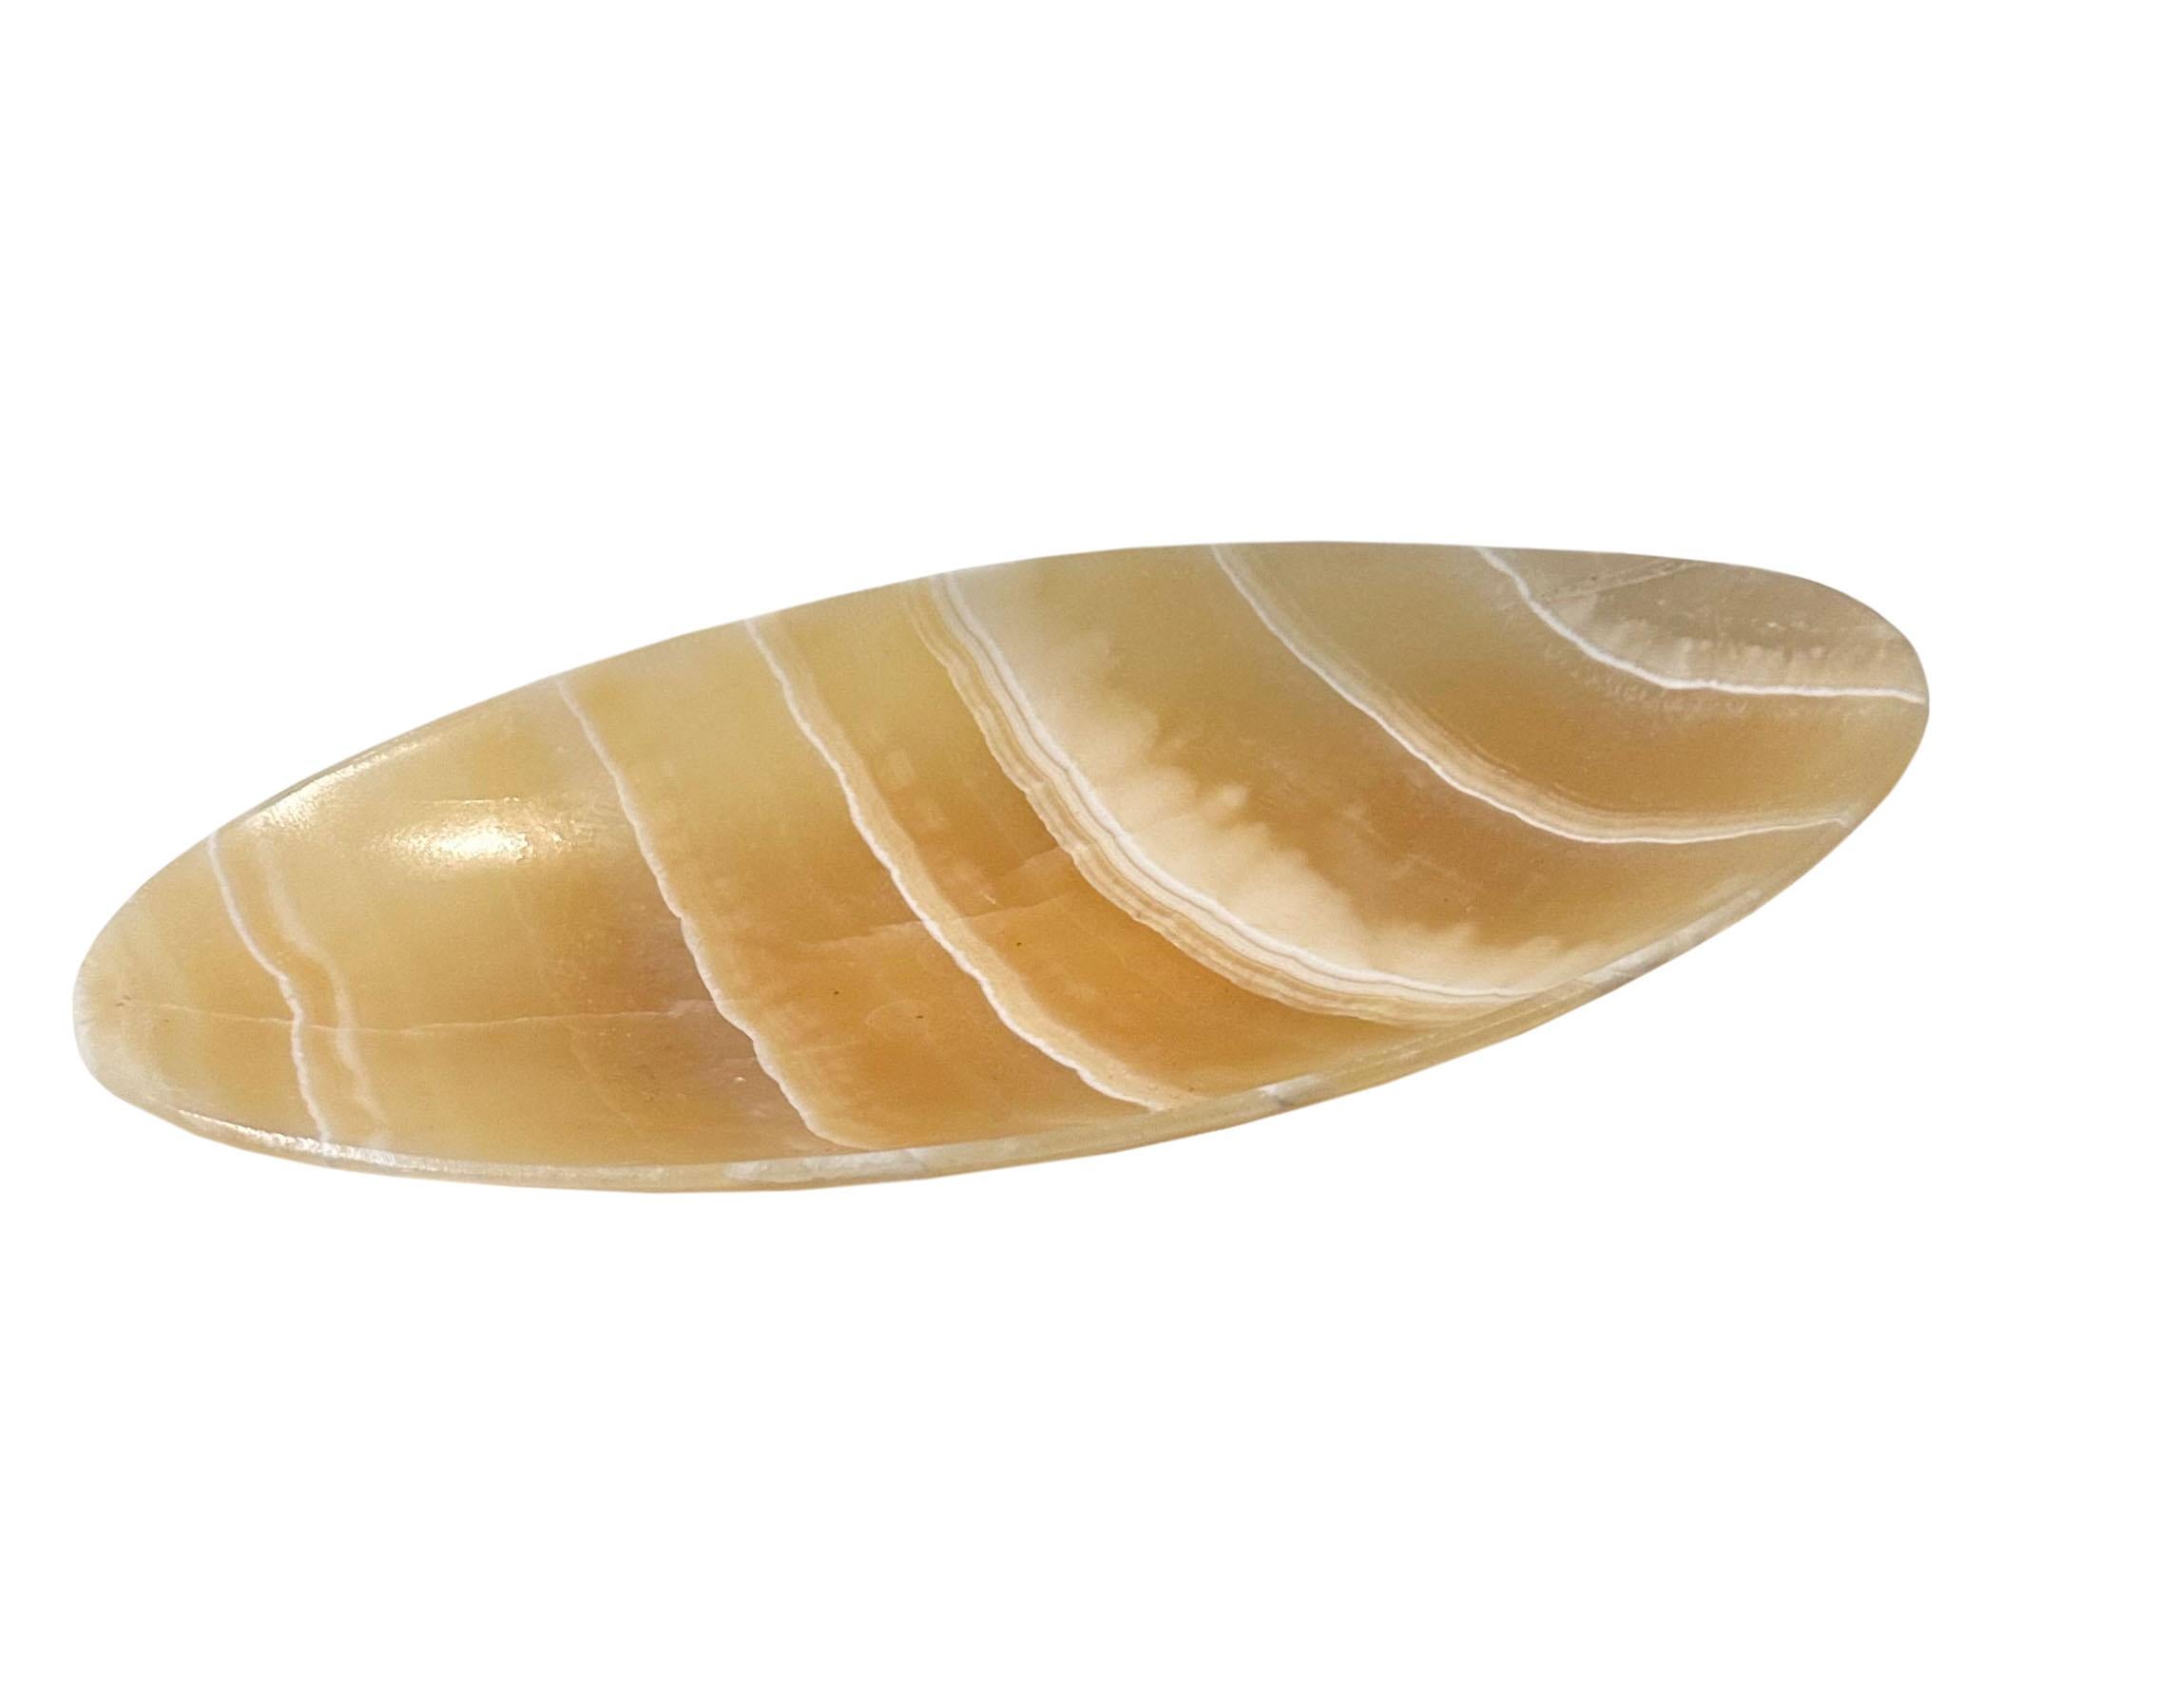 A vintage amber Araconite alabaster dish. This is the perfect size and shape for any type of table display. Italy, circa 1950s. 